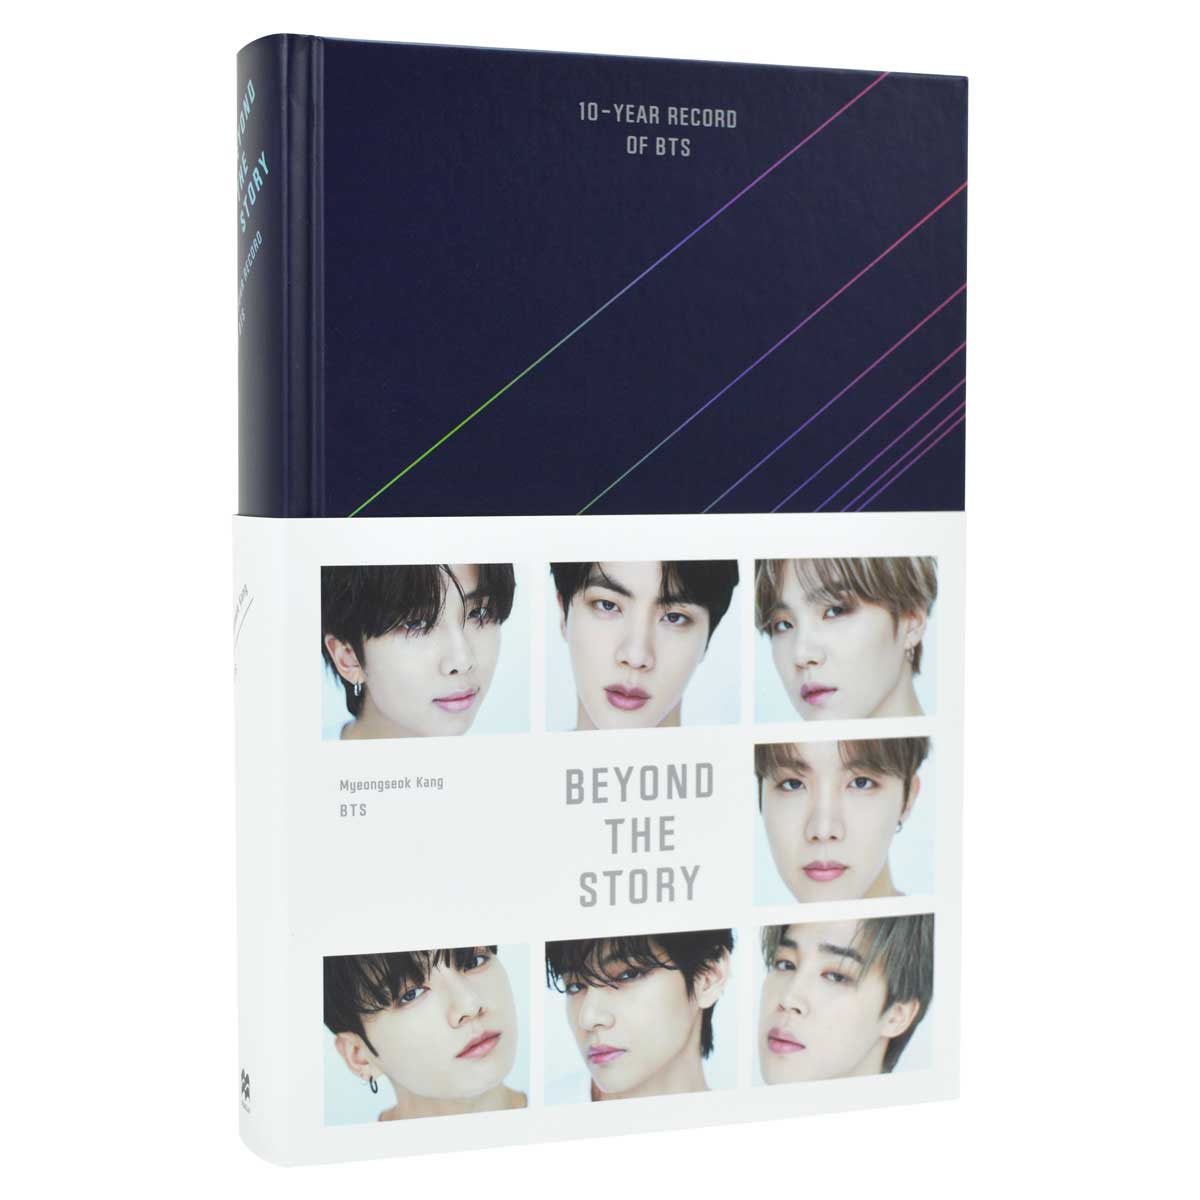 Beyond the Story: 10 Year Record of BTS